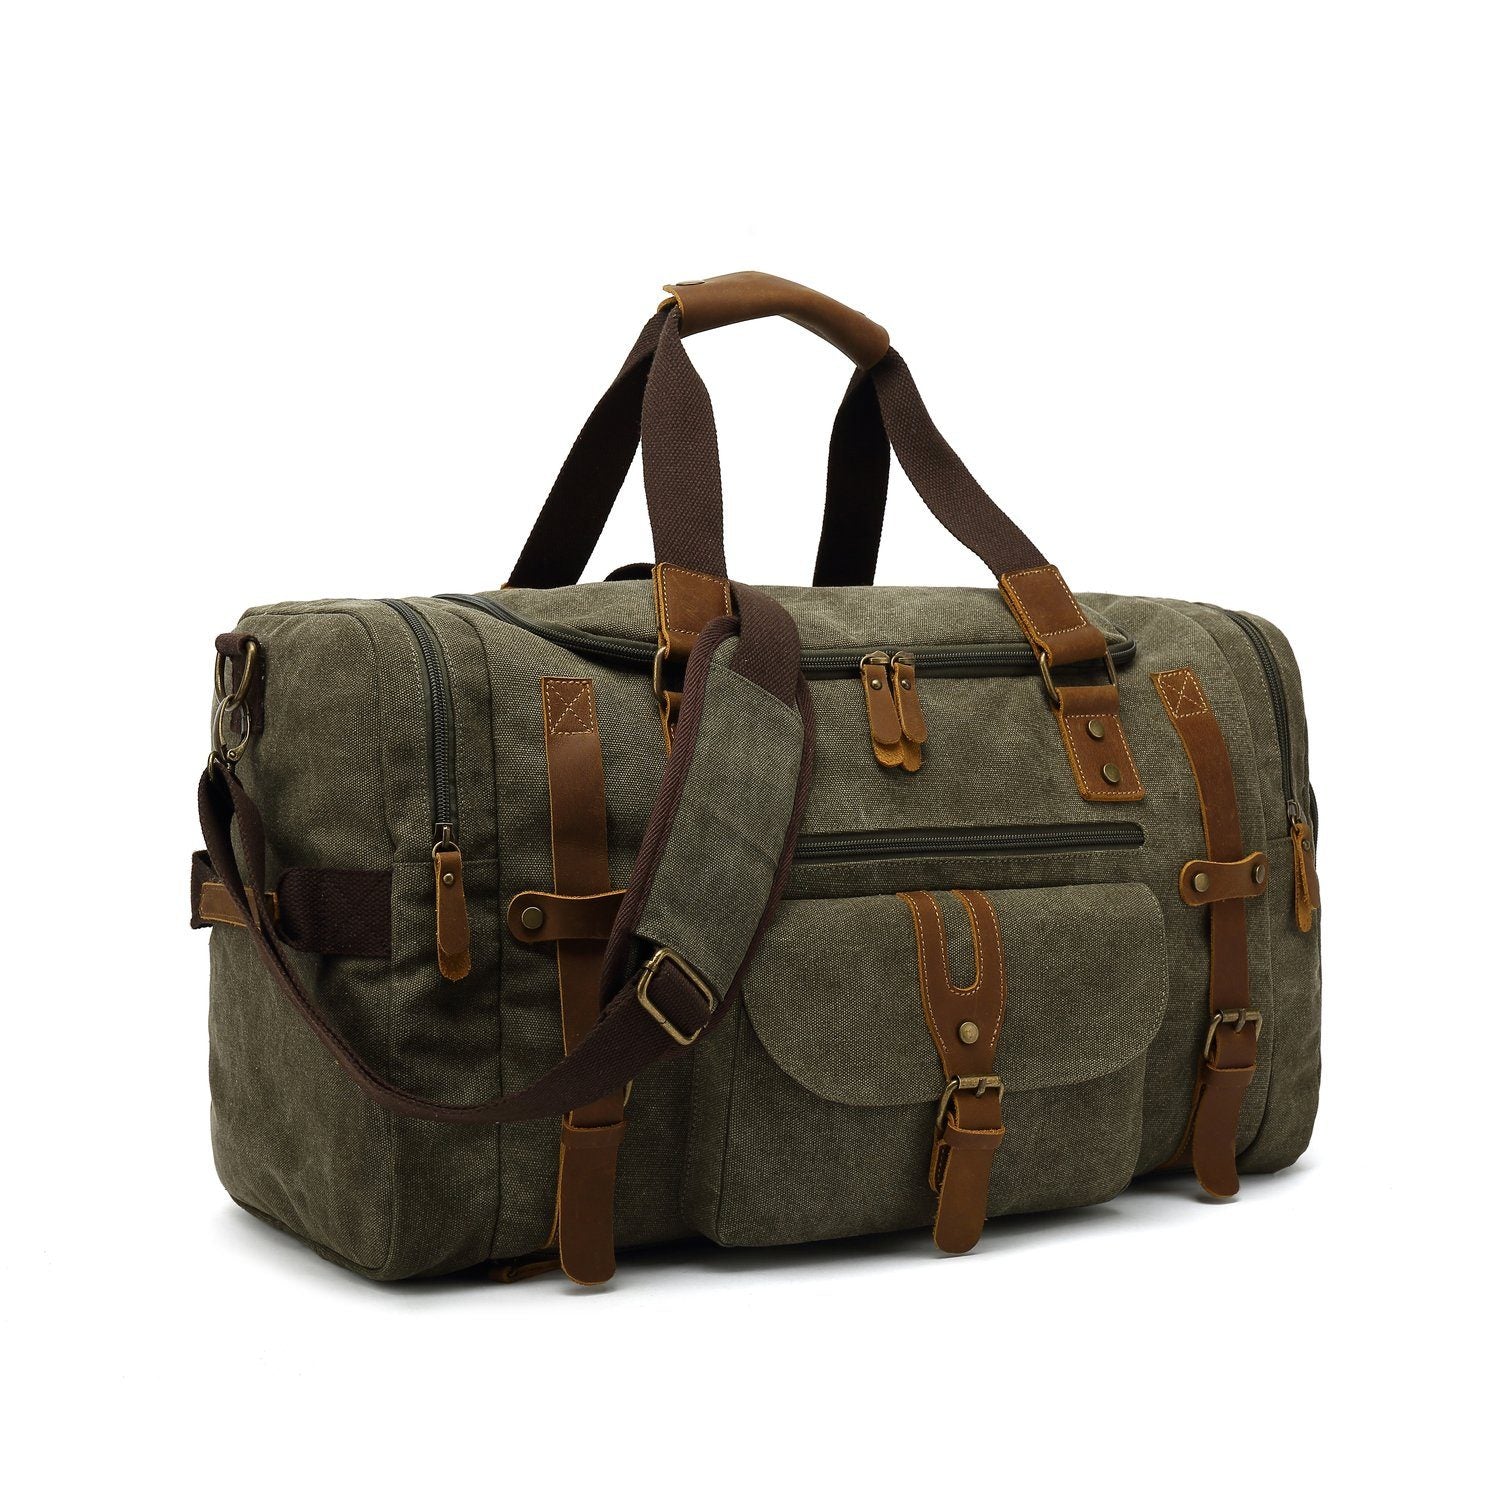 Unisex small duffle bag with padded compartments